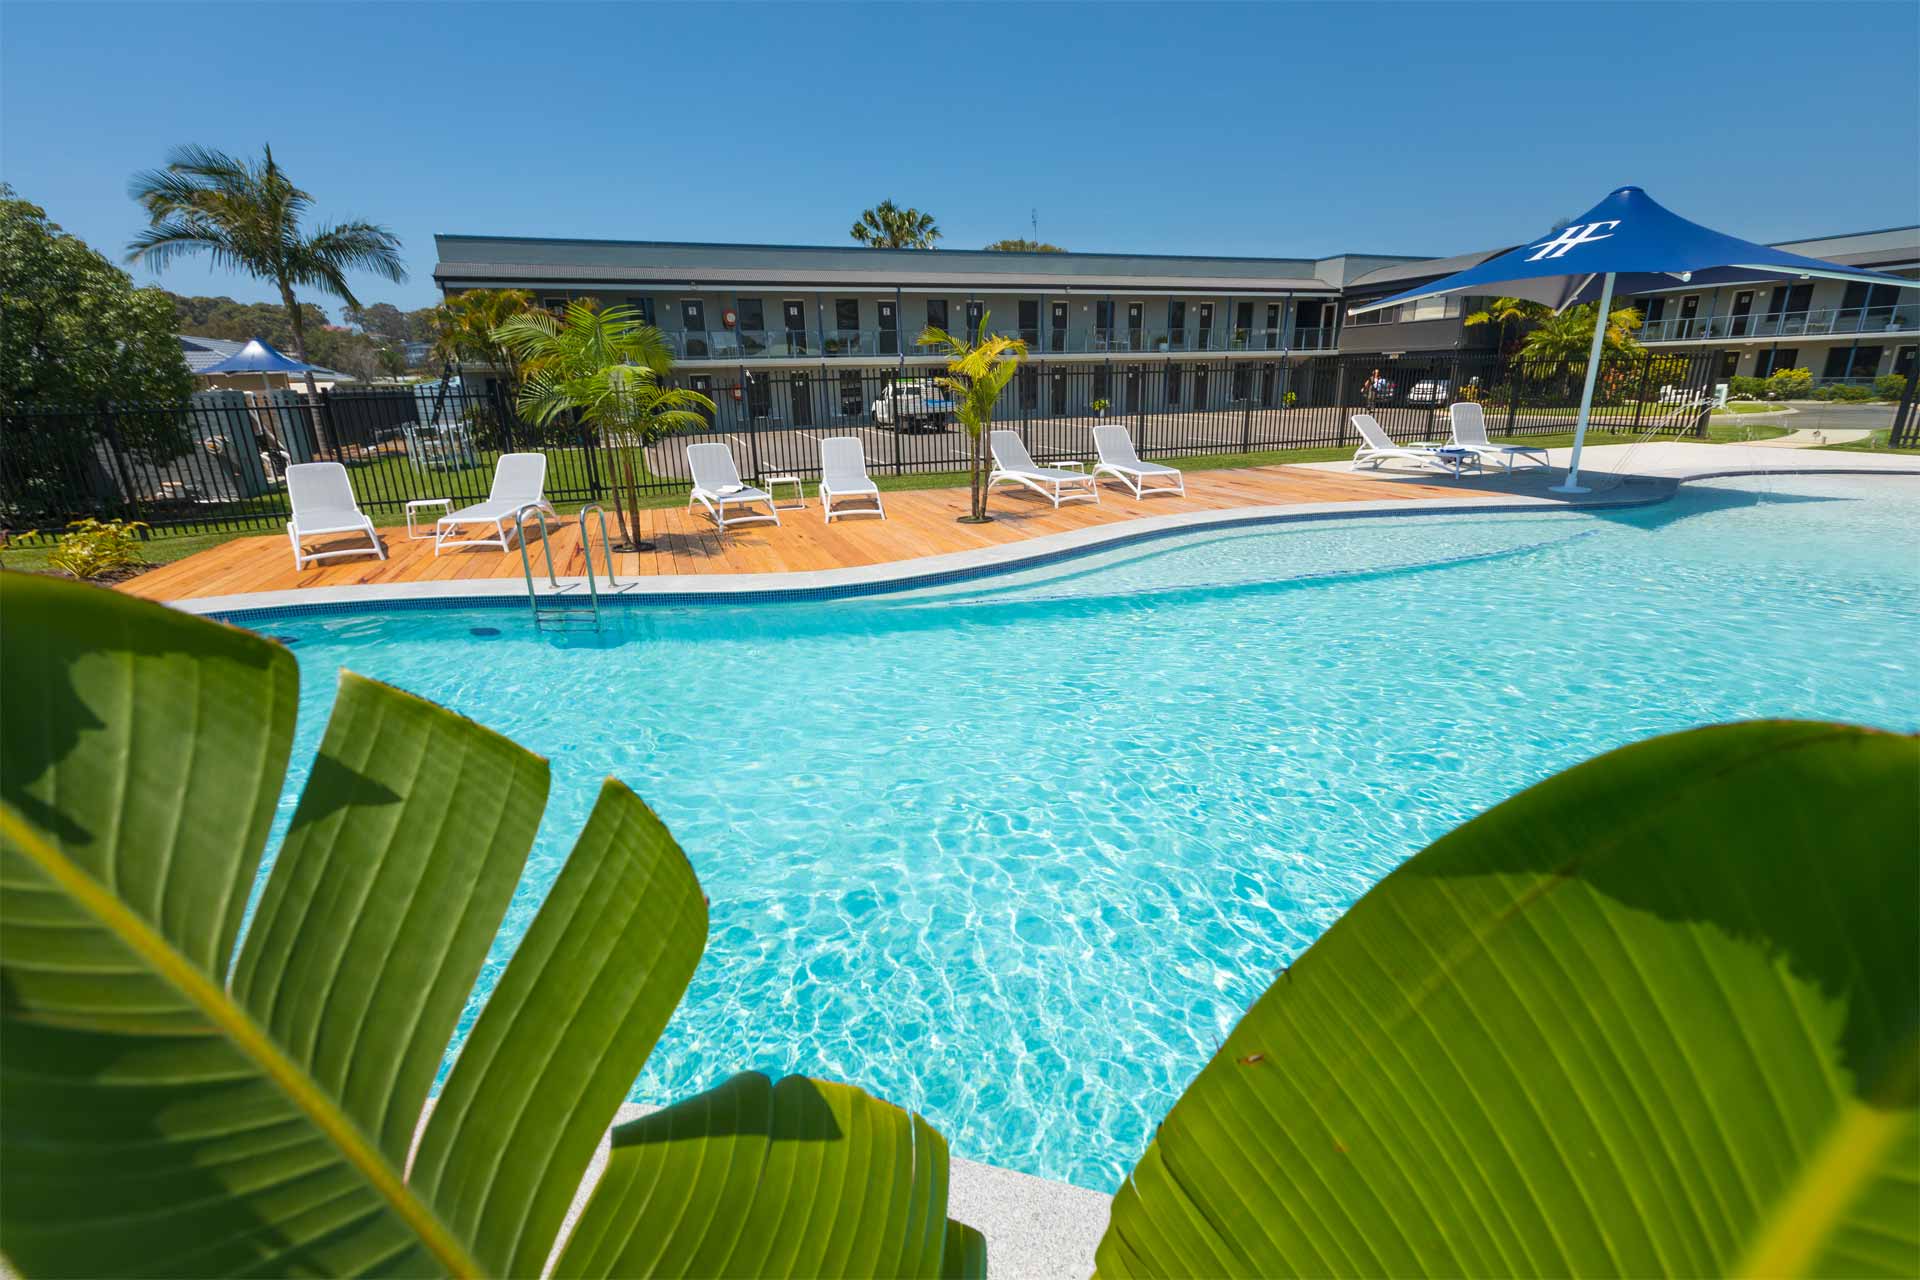 11. Hotel Forster - tropical oasis with new pool